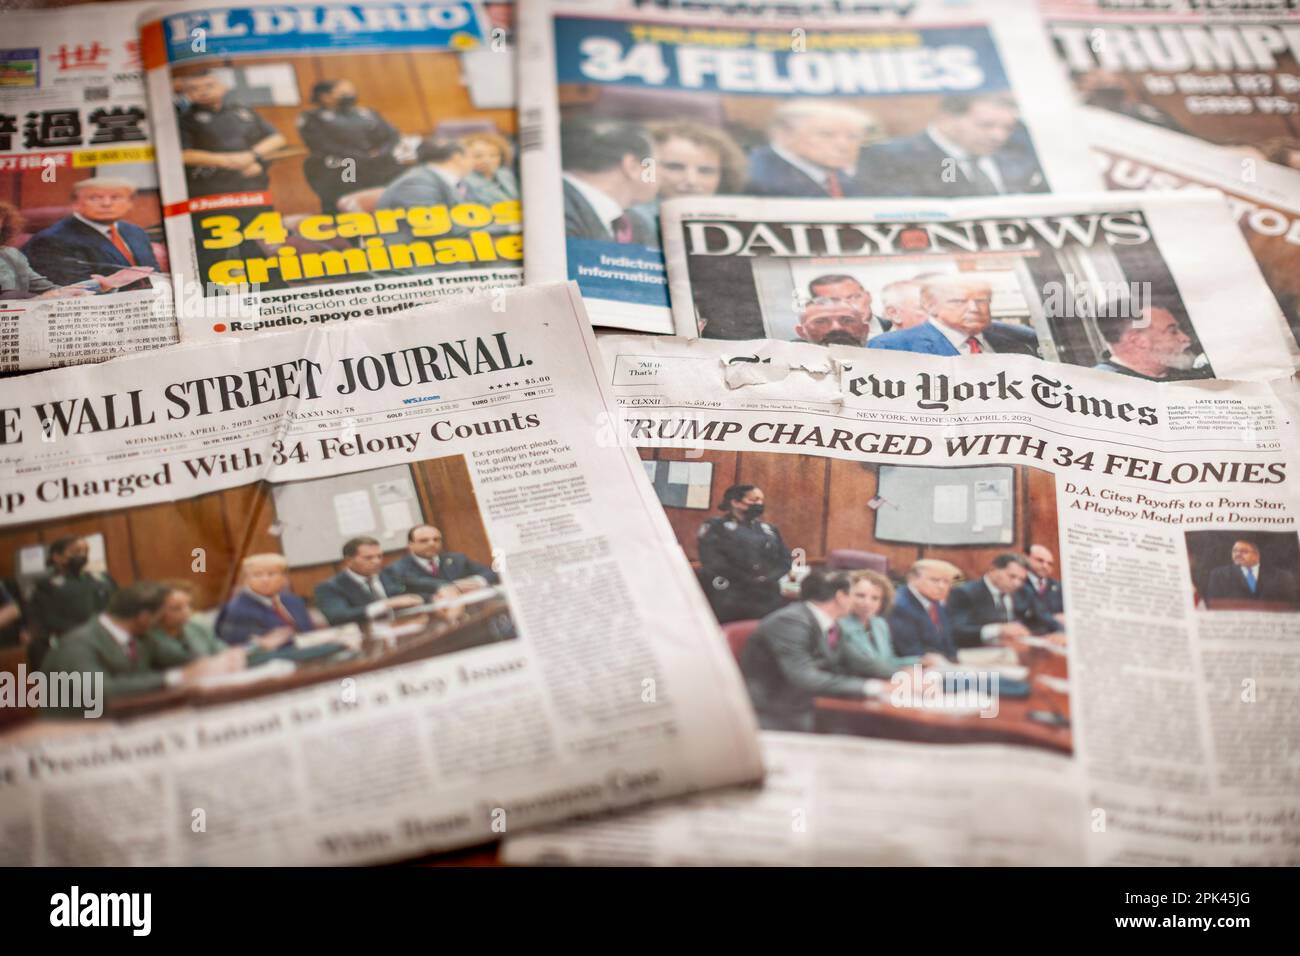 Newspapers in New York on Wednesday, April 5, 2023 report on the previous day’s arraignment of former President Donald Trump, being charged with 34 felonies over the alleged payment of hush money to Stormy Daniels. (© Richard B. Levine) Stock Photo